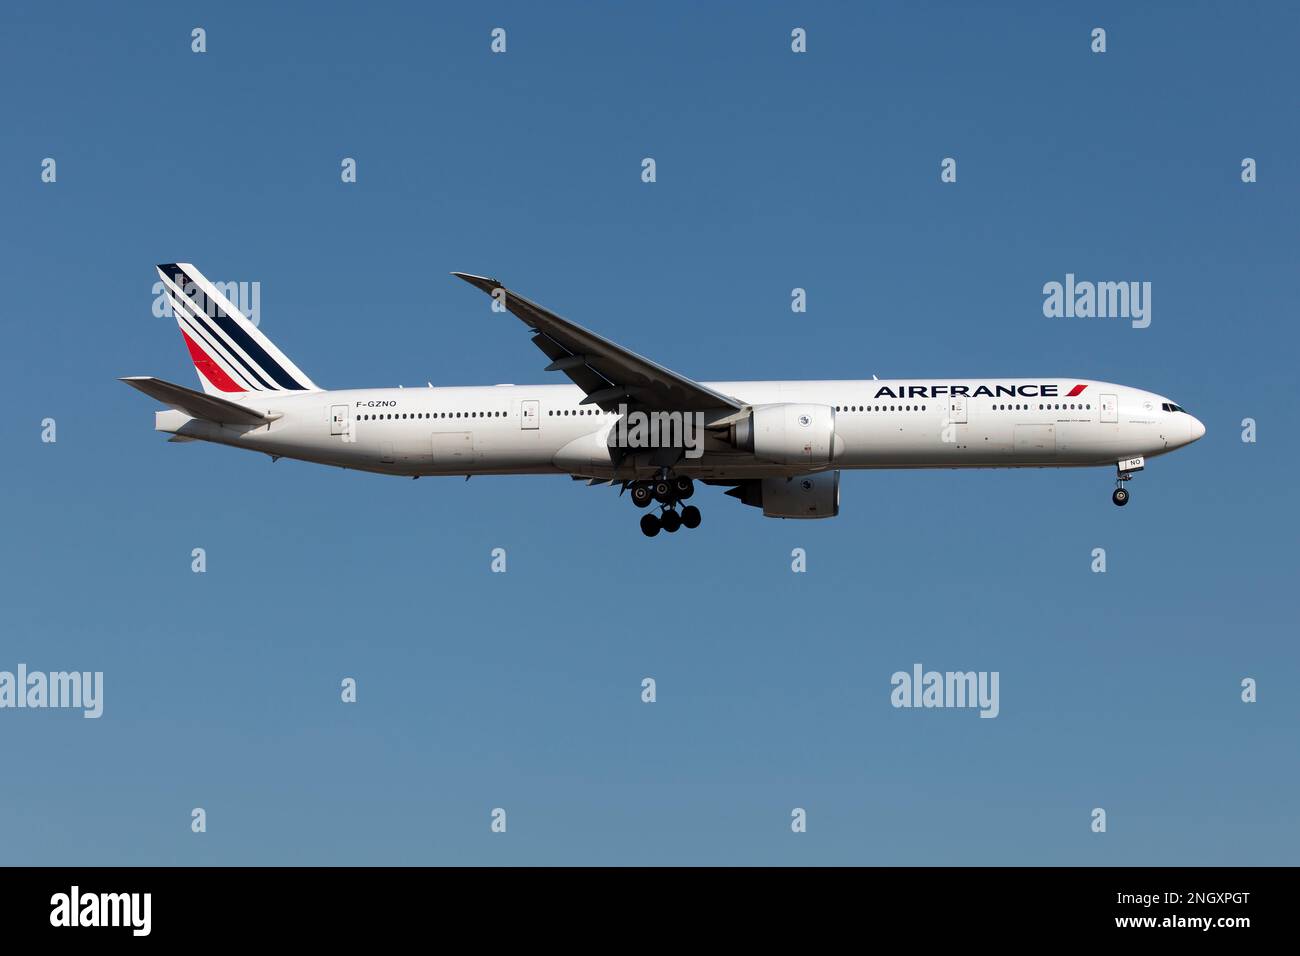 An Air France Boeing 777-300ER landing at Montreal Trudeau airport. Air Franc, is the flag carrier of France headquartered in Tremblay-en-France (Charles de Gaulle airport). It is a subsidiary of the Air France–KLM Group and a founding member of the SkyTeam global airline alliance. Stock Photo